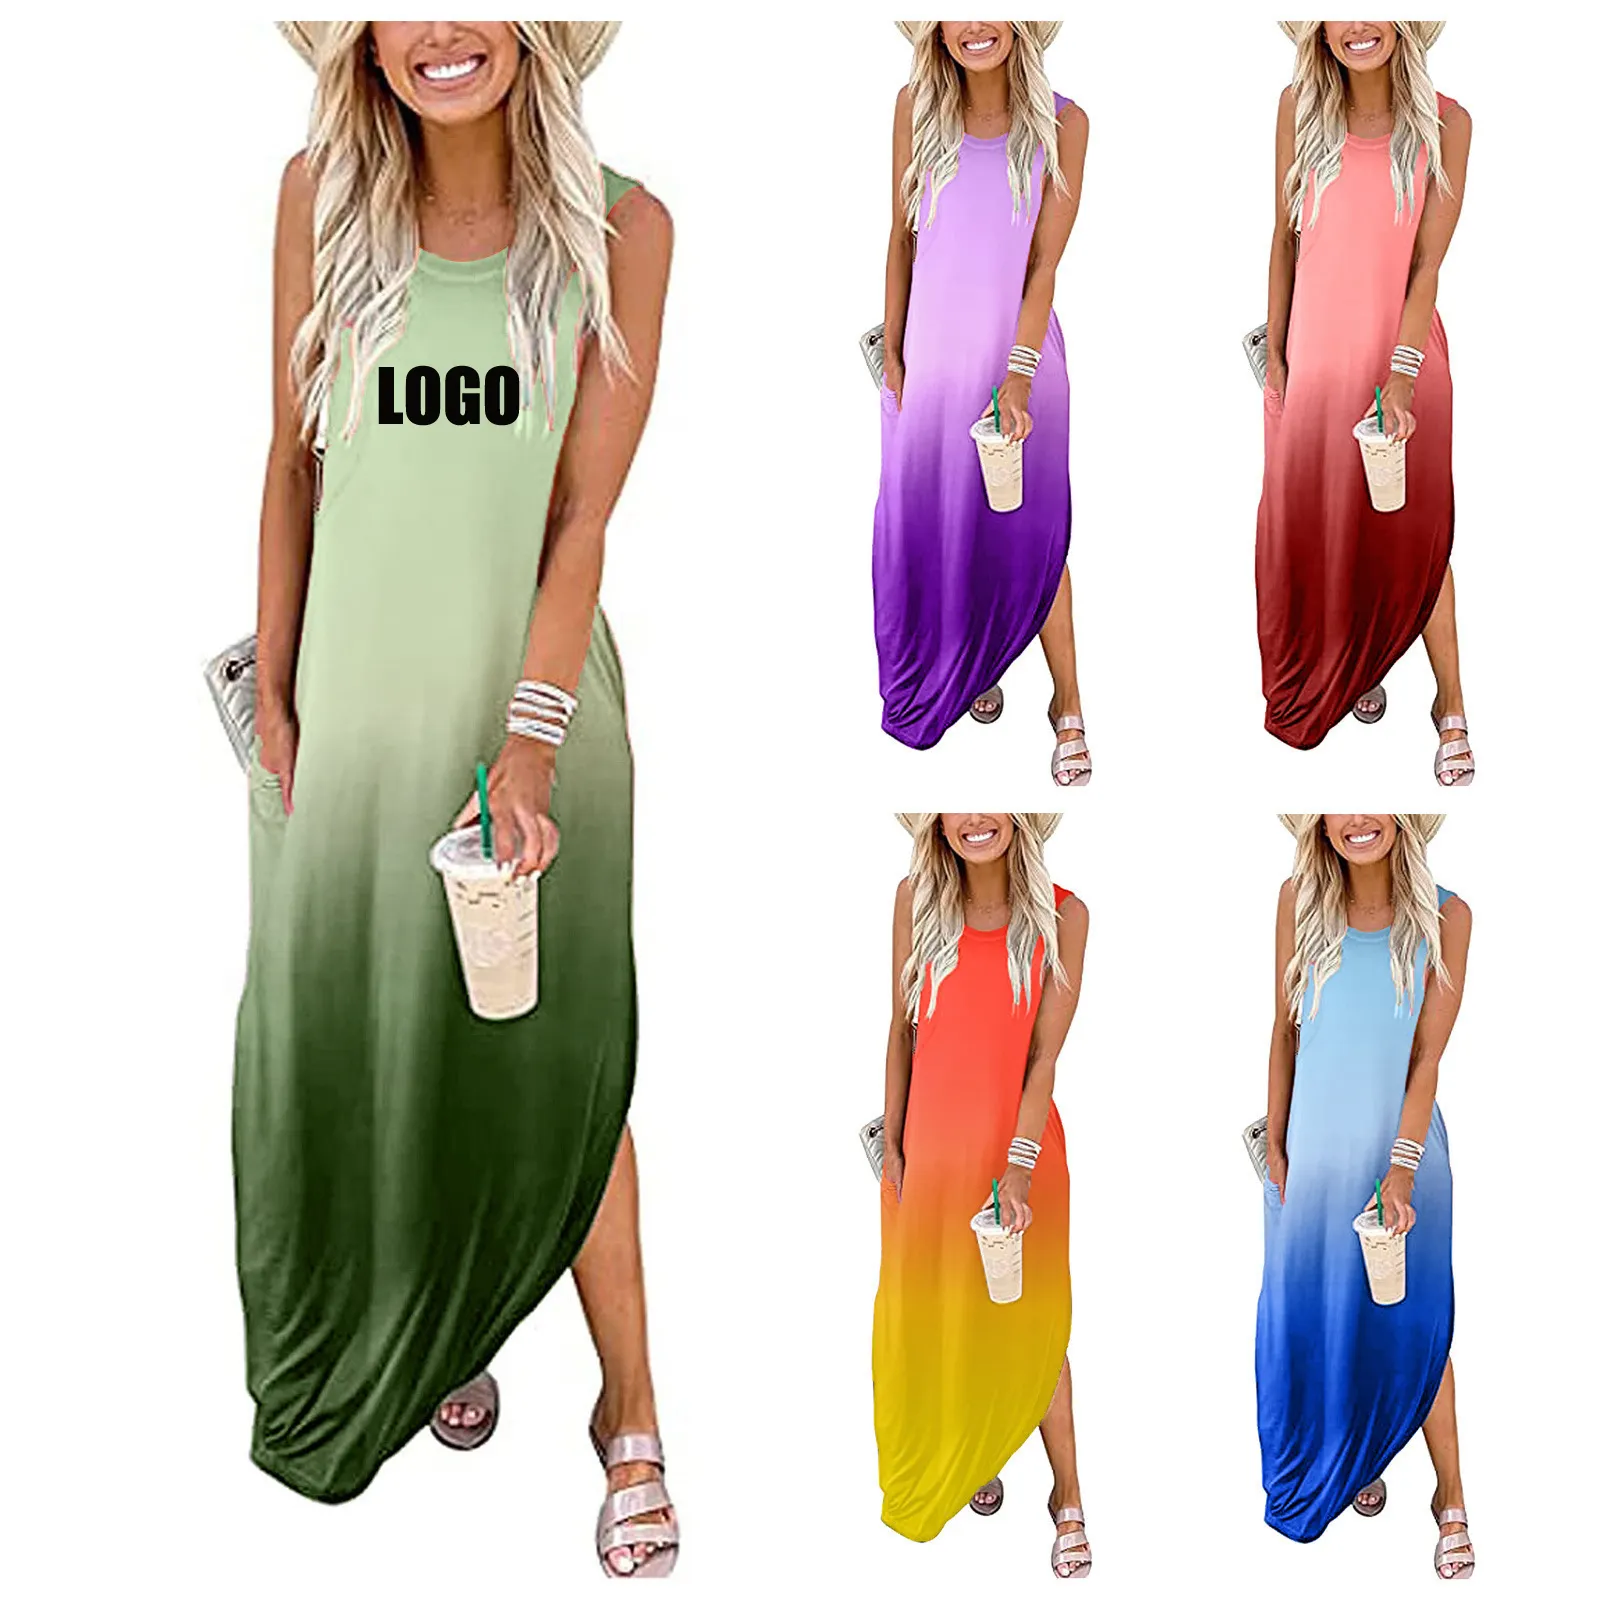 Hot sale fashion Summer casual adult sleeveless gradient color clothes Printed logo Floral Women's Clothing Elegant Lady dresses